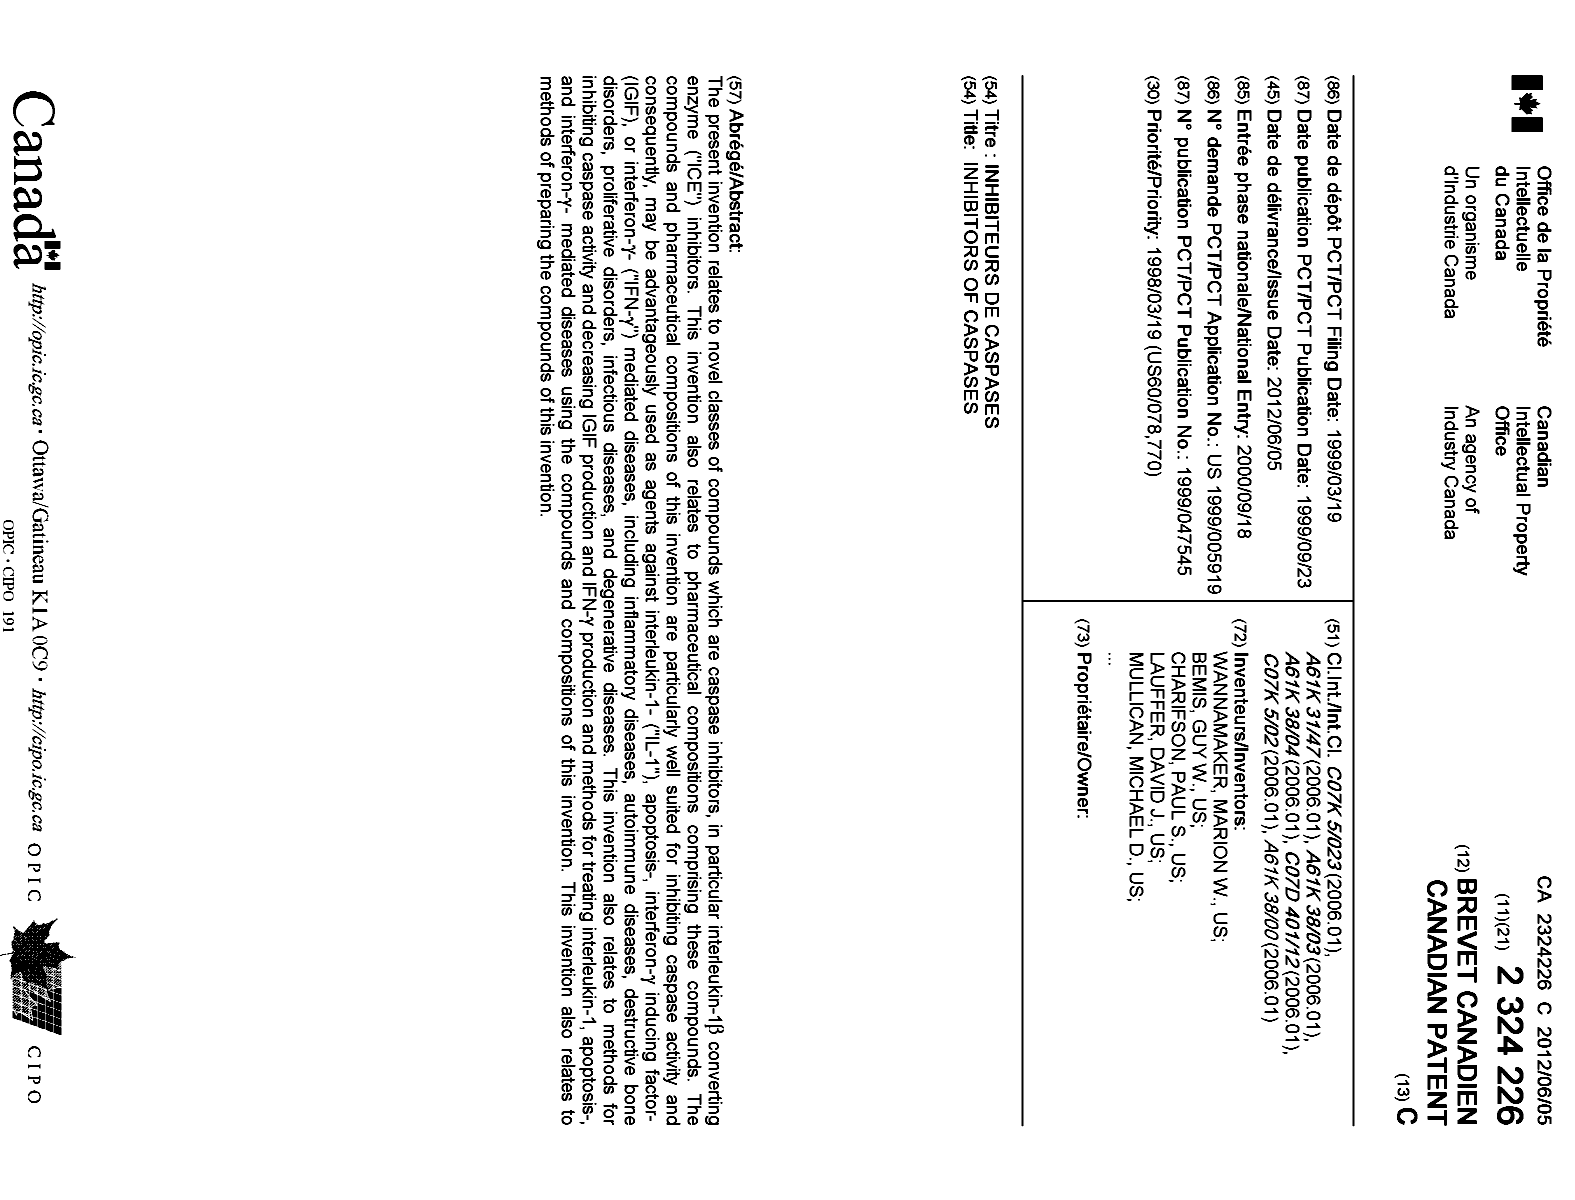 Canadian Patent Document 2324226. Cover Page 20120508. Image 1 of 1